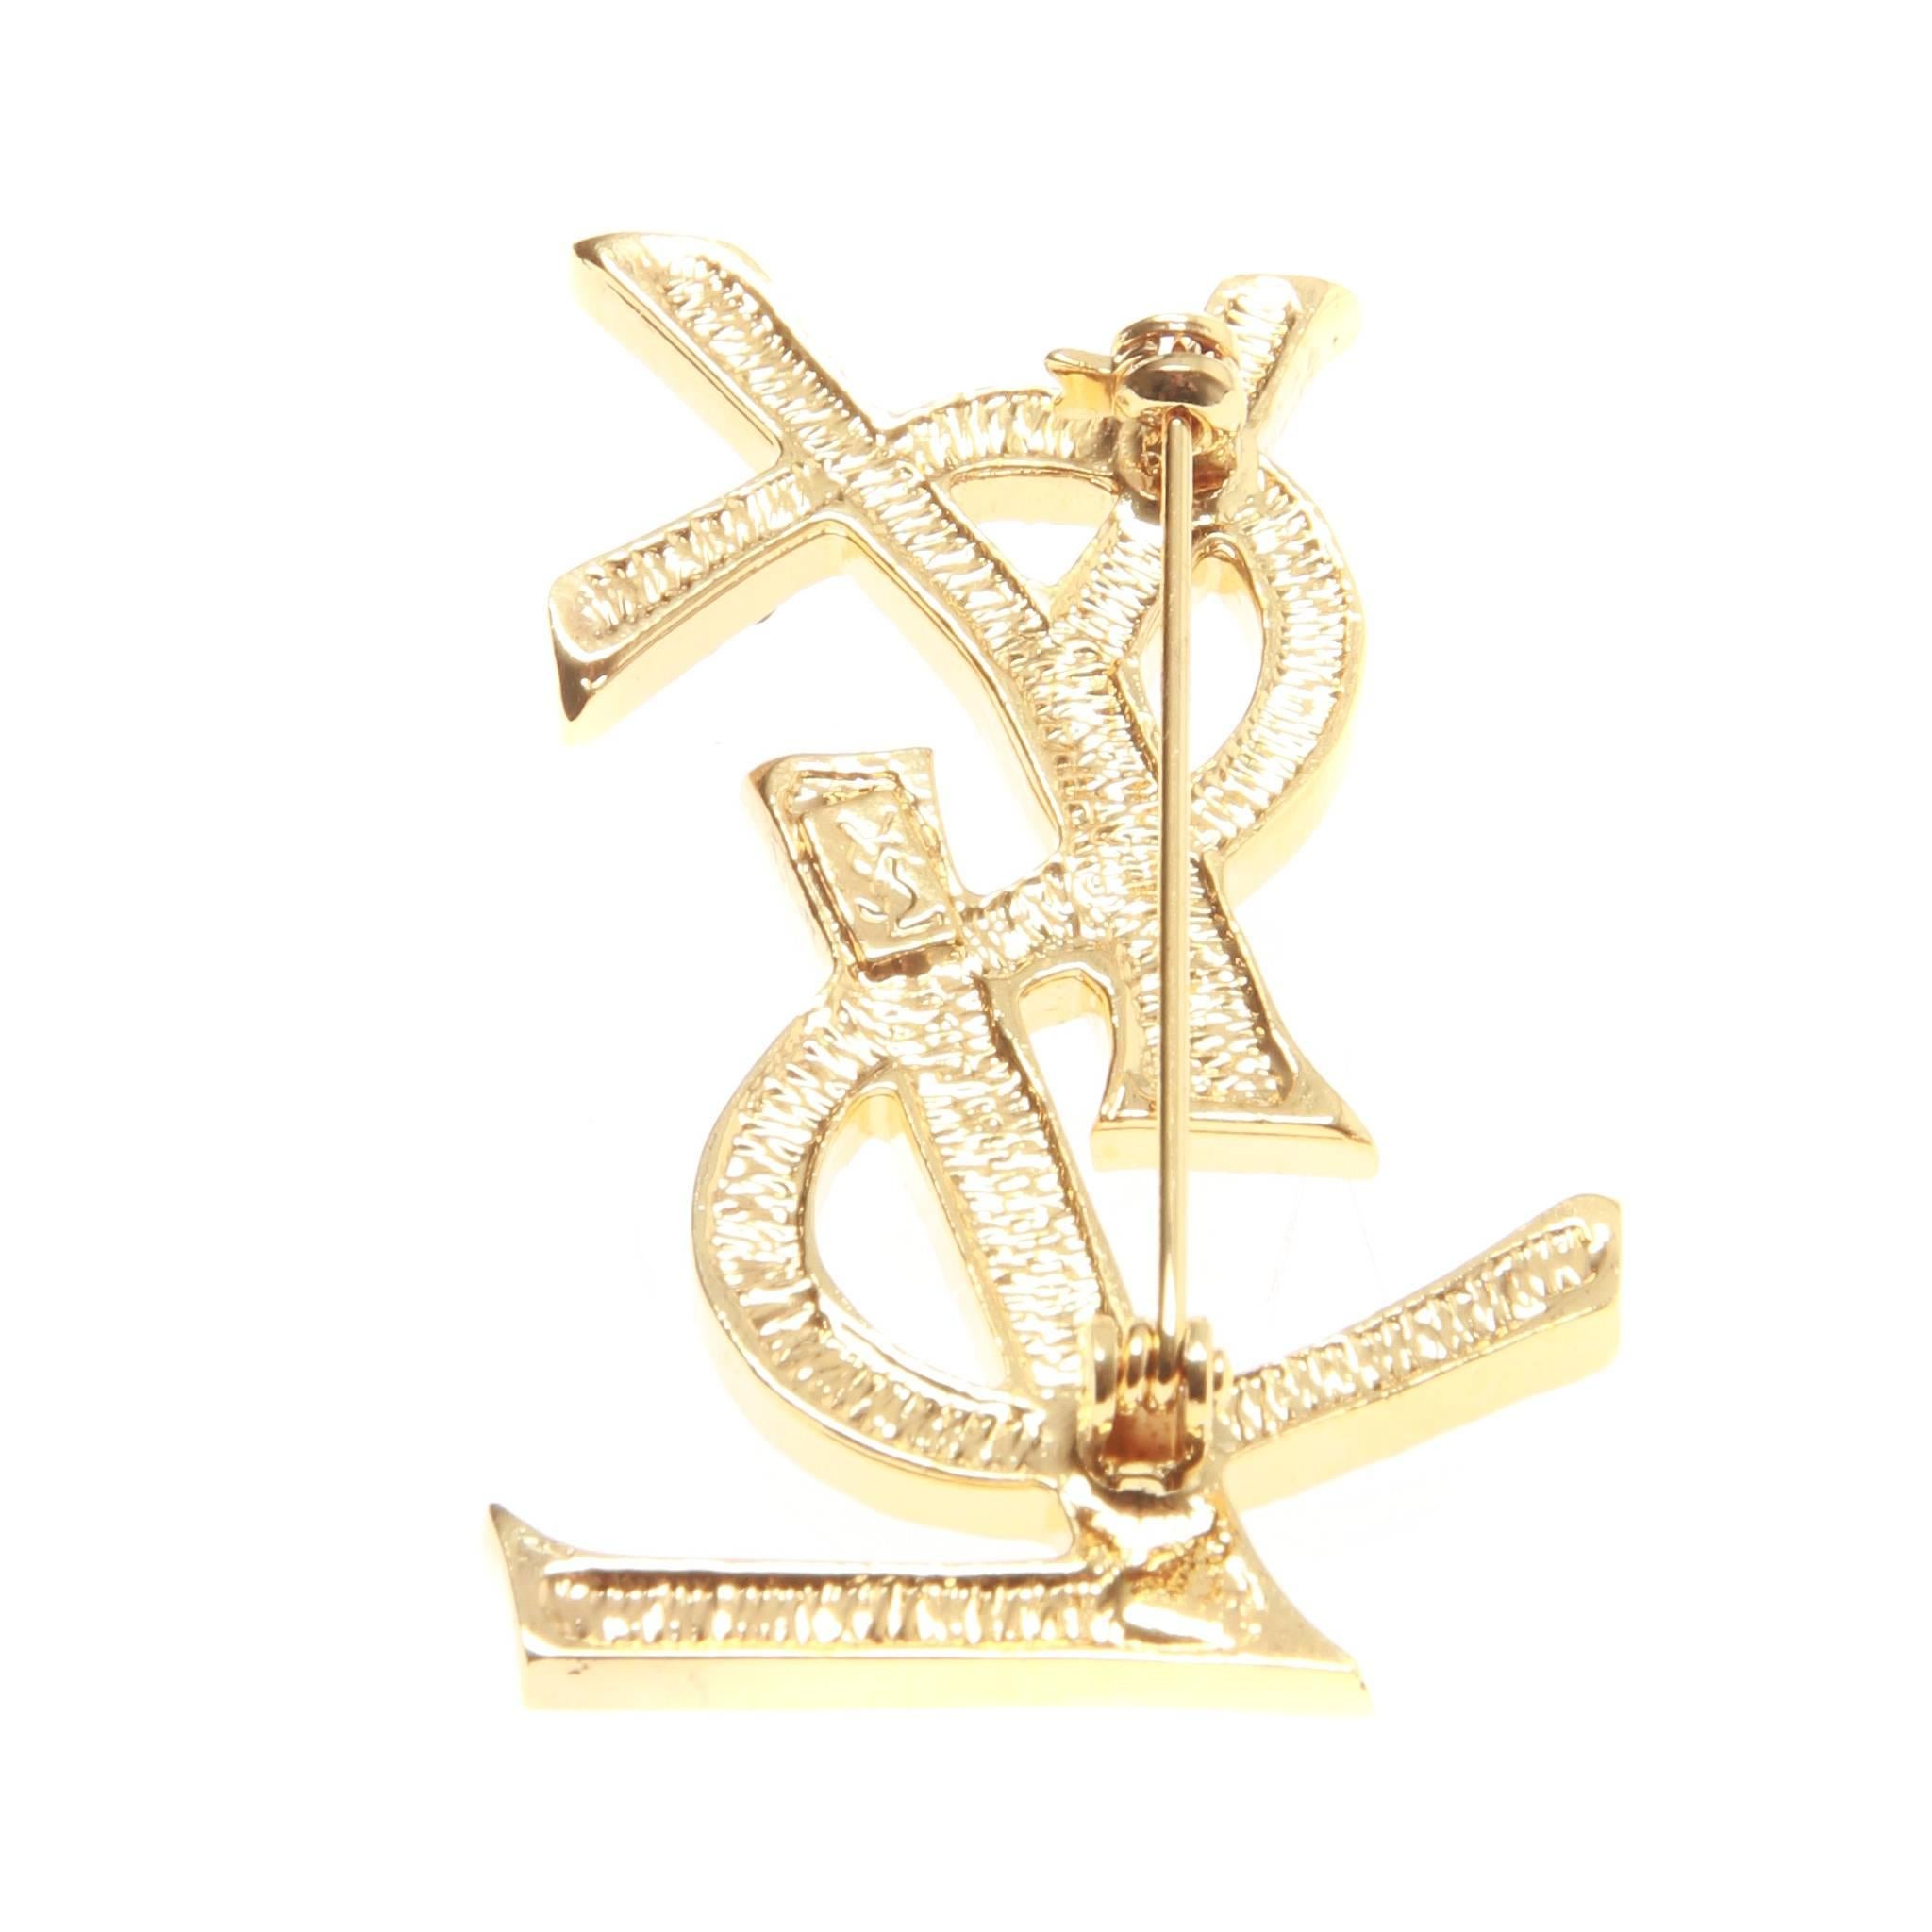 Iconic vintage monogram brooch featuring a Swarovski crystals set in a gold-plate setting. 

Engraved YSL. 

Circa 80s 